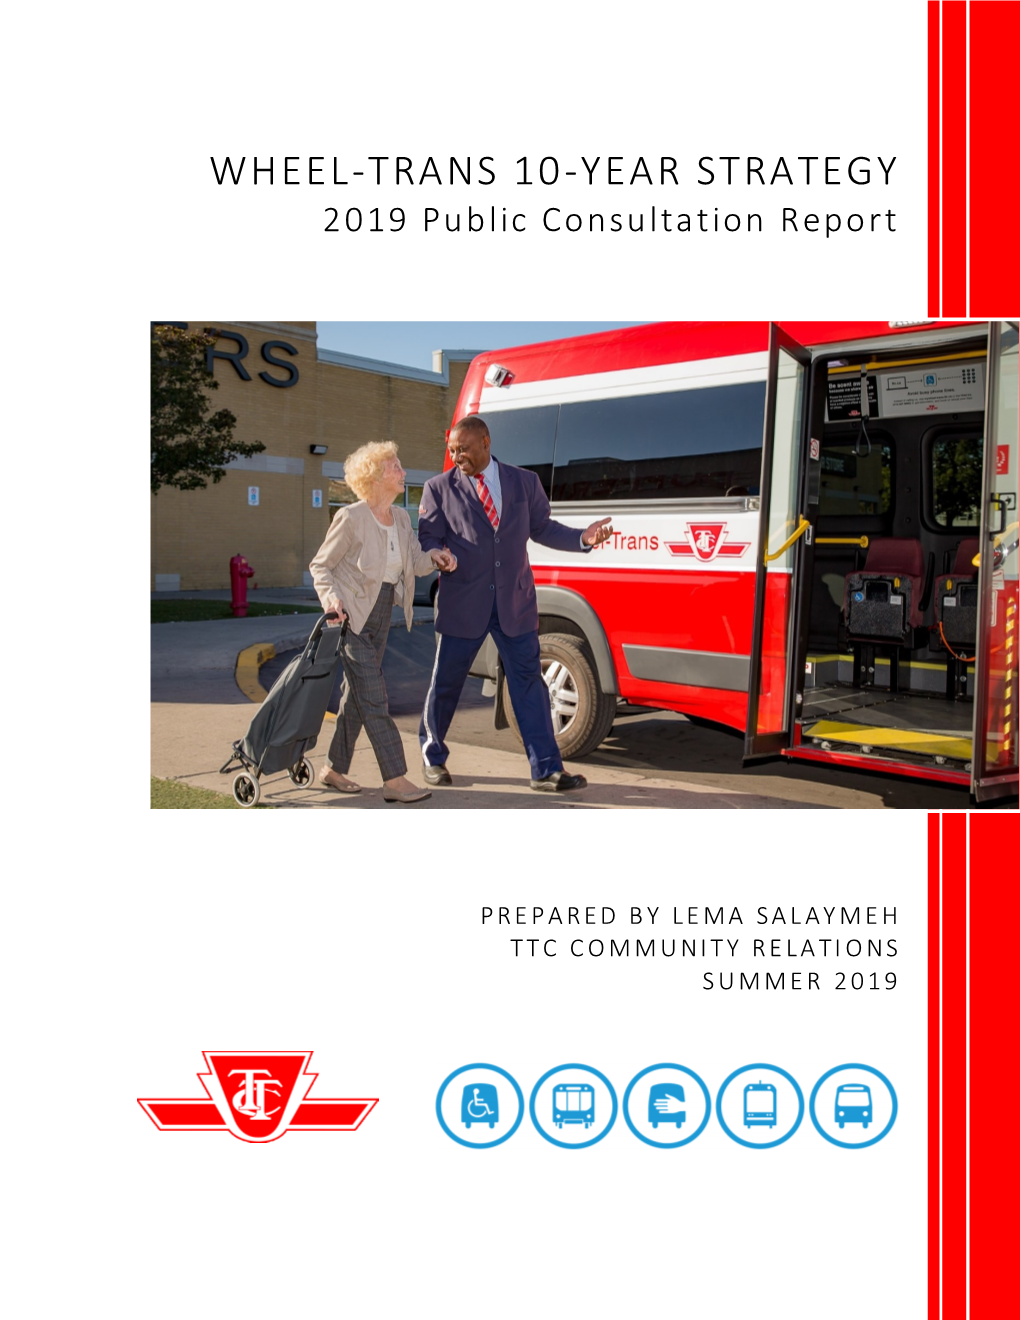 WHEEL-TRANS 10-YEAR STRATEGY 2019 Public Consultation Report